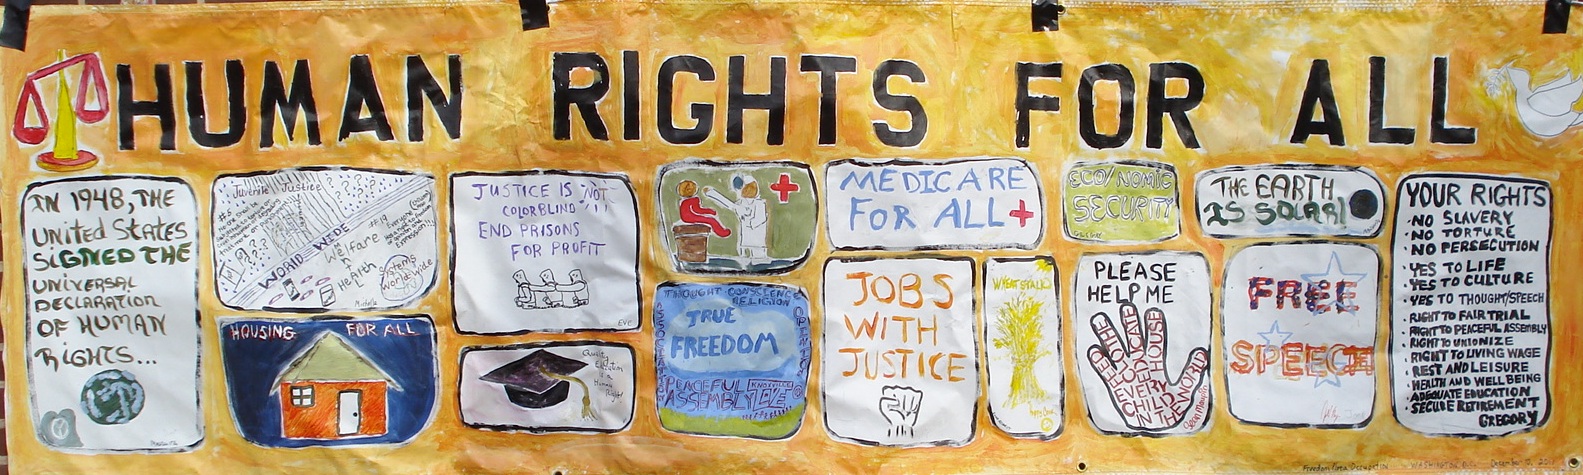 Human Rights Banner